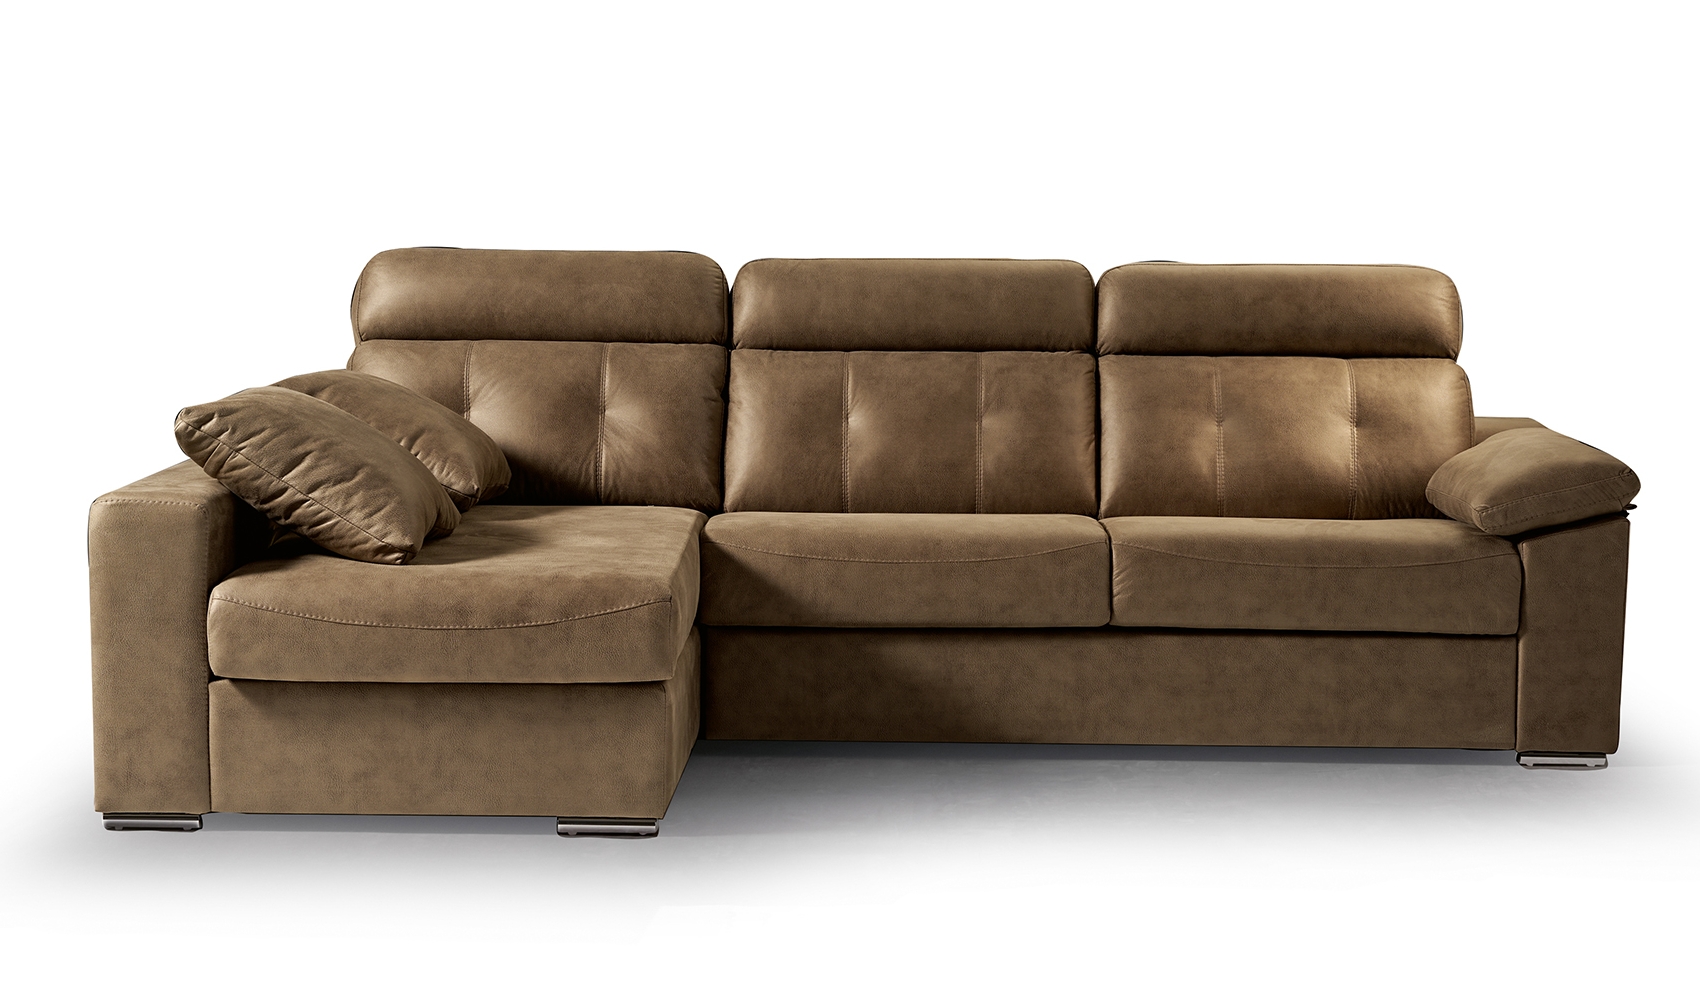 Nerea Chaise Sofa bed 